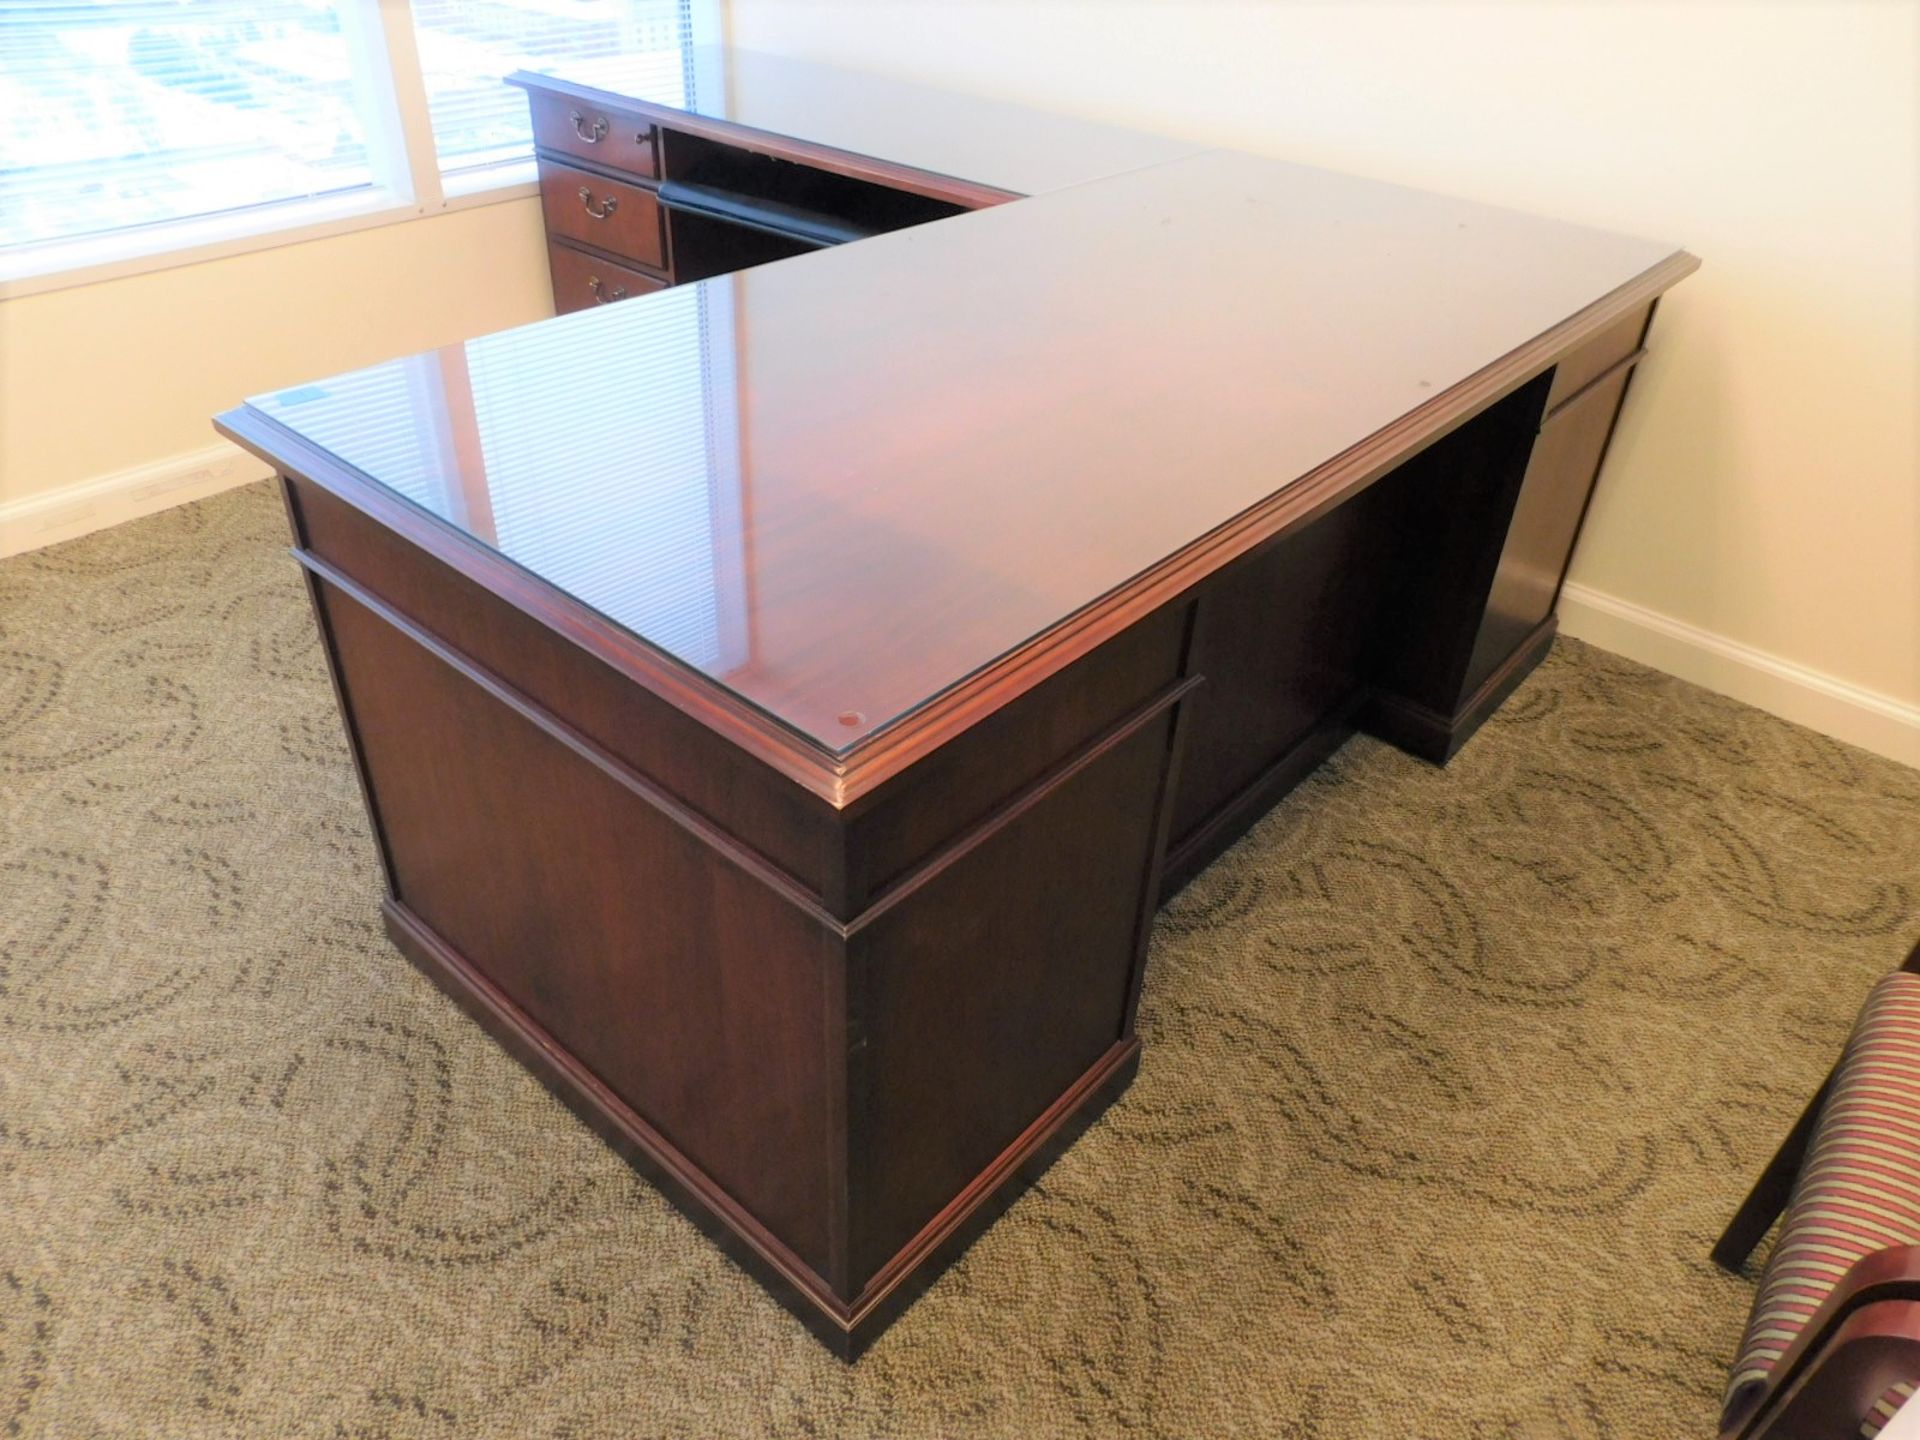 KIMBALL SENATOR SERIES 36" X 72" EXECUTIVE L DESK W/ LEFT 54" EXTENSION, FIXED CENTER DRAWER, - Image 2 of 3